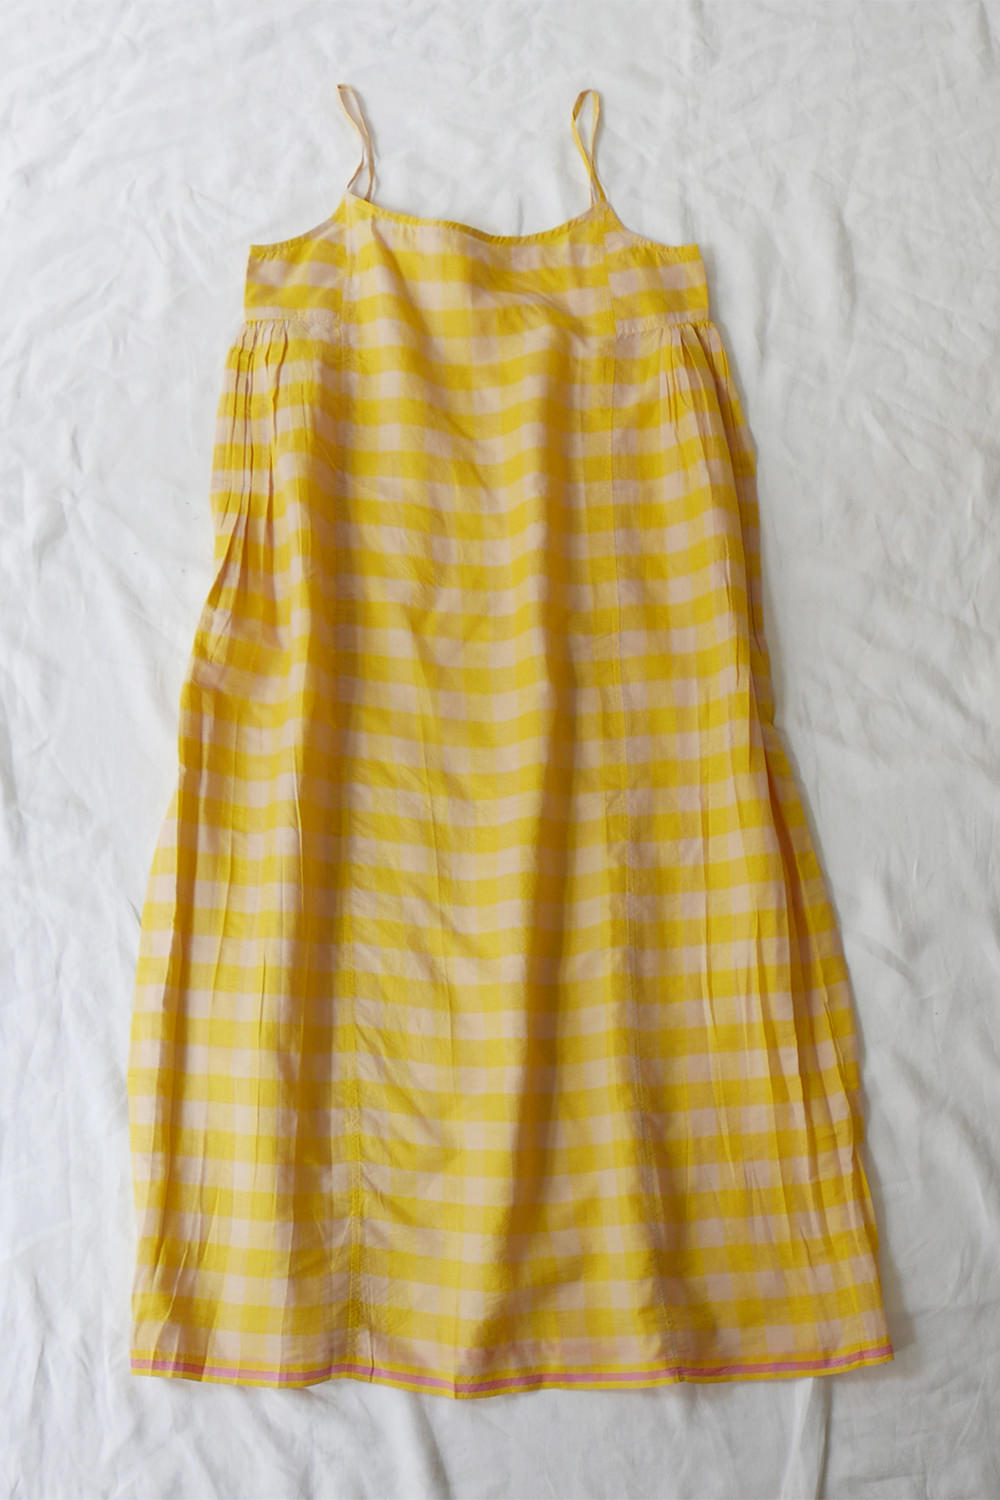 50% Silk, 50% Cotton. Made in India. Yellow check with pink line.